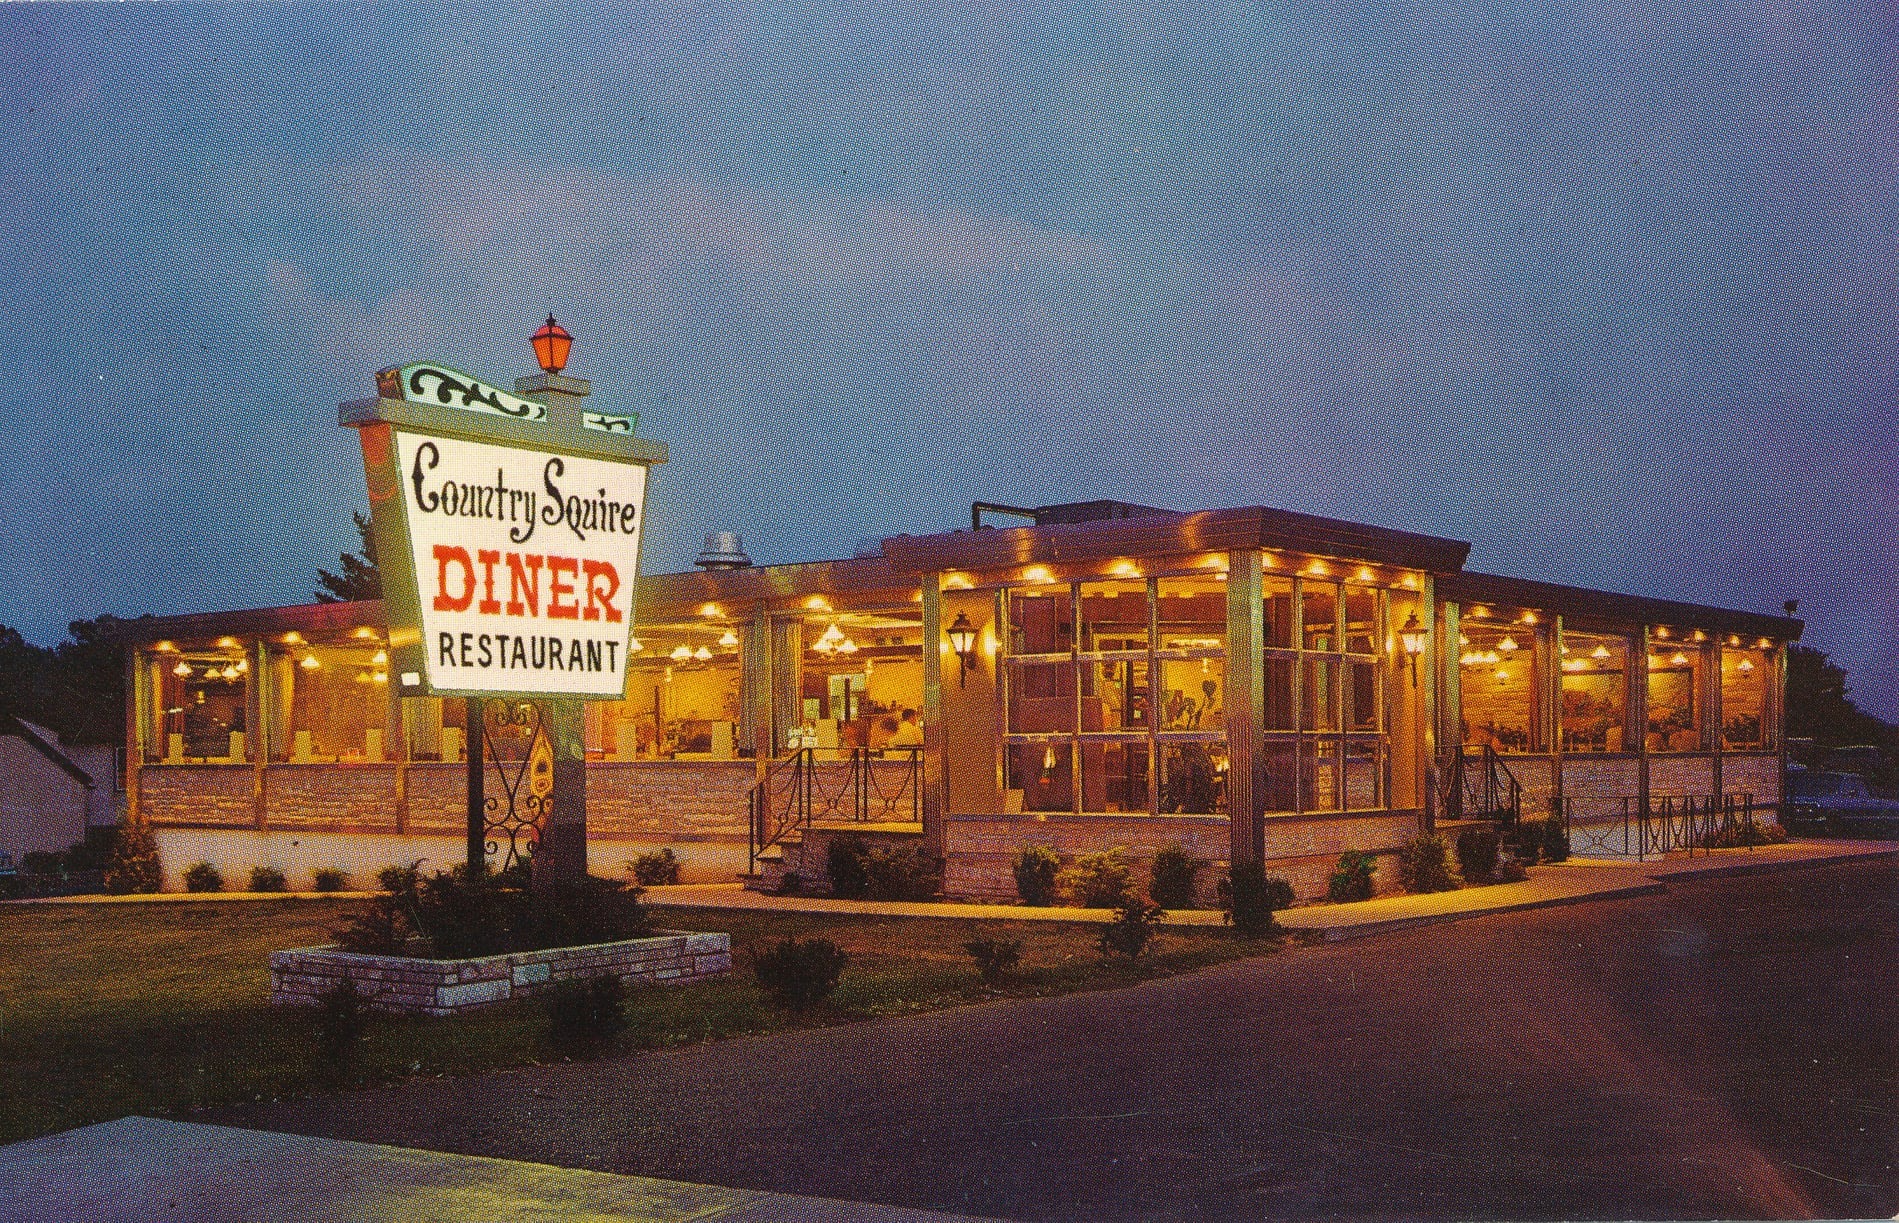 DR. PATRICK’S POSTCARD ROADSIDE: Country Squire Diner